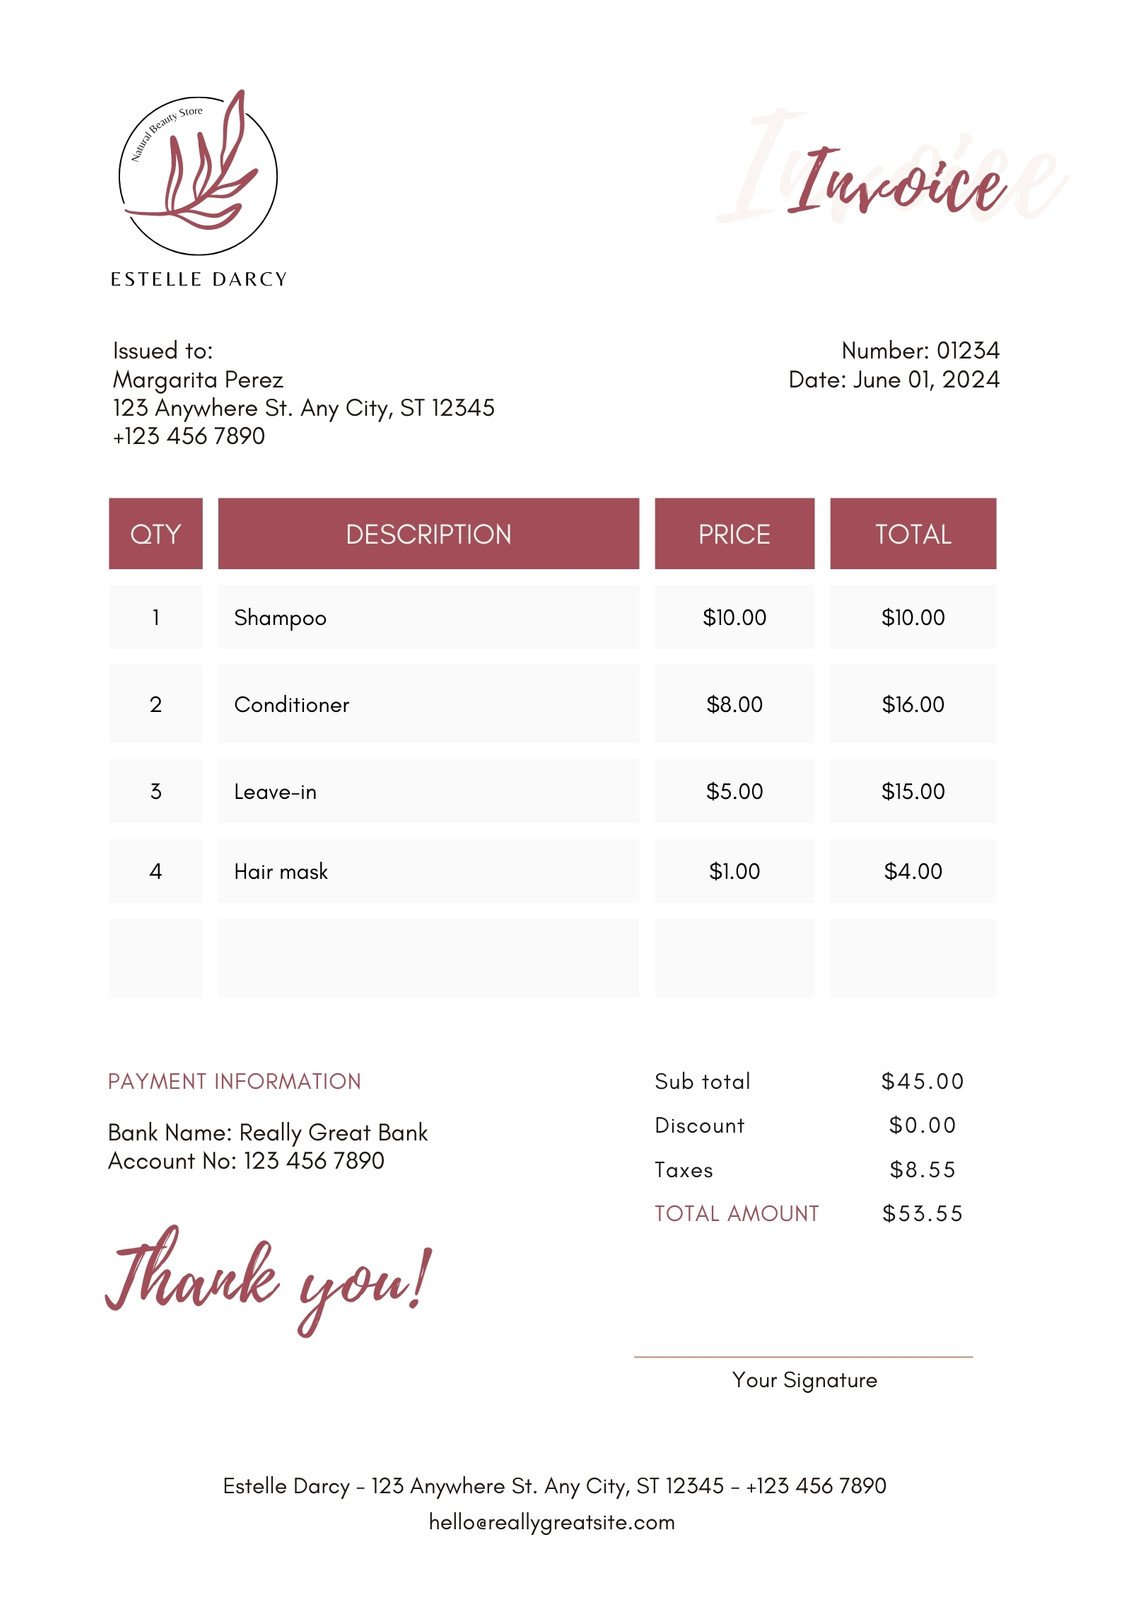 Page 2 - Free printable, customizable service invoice templates